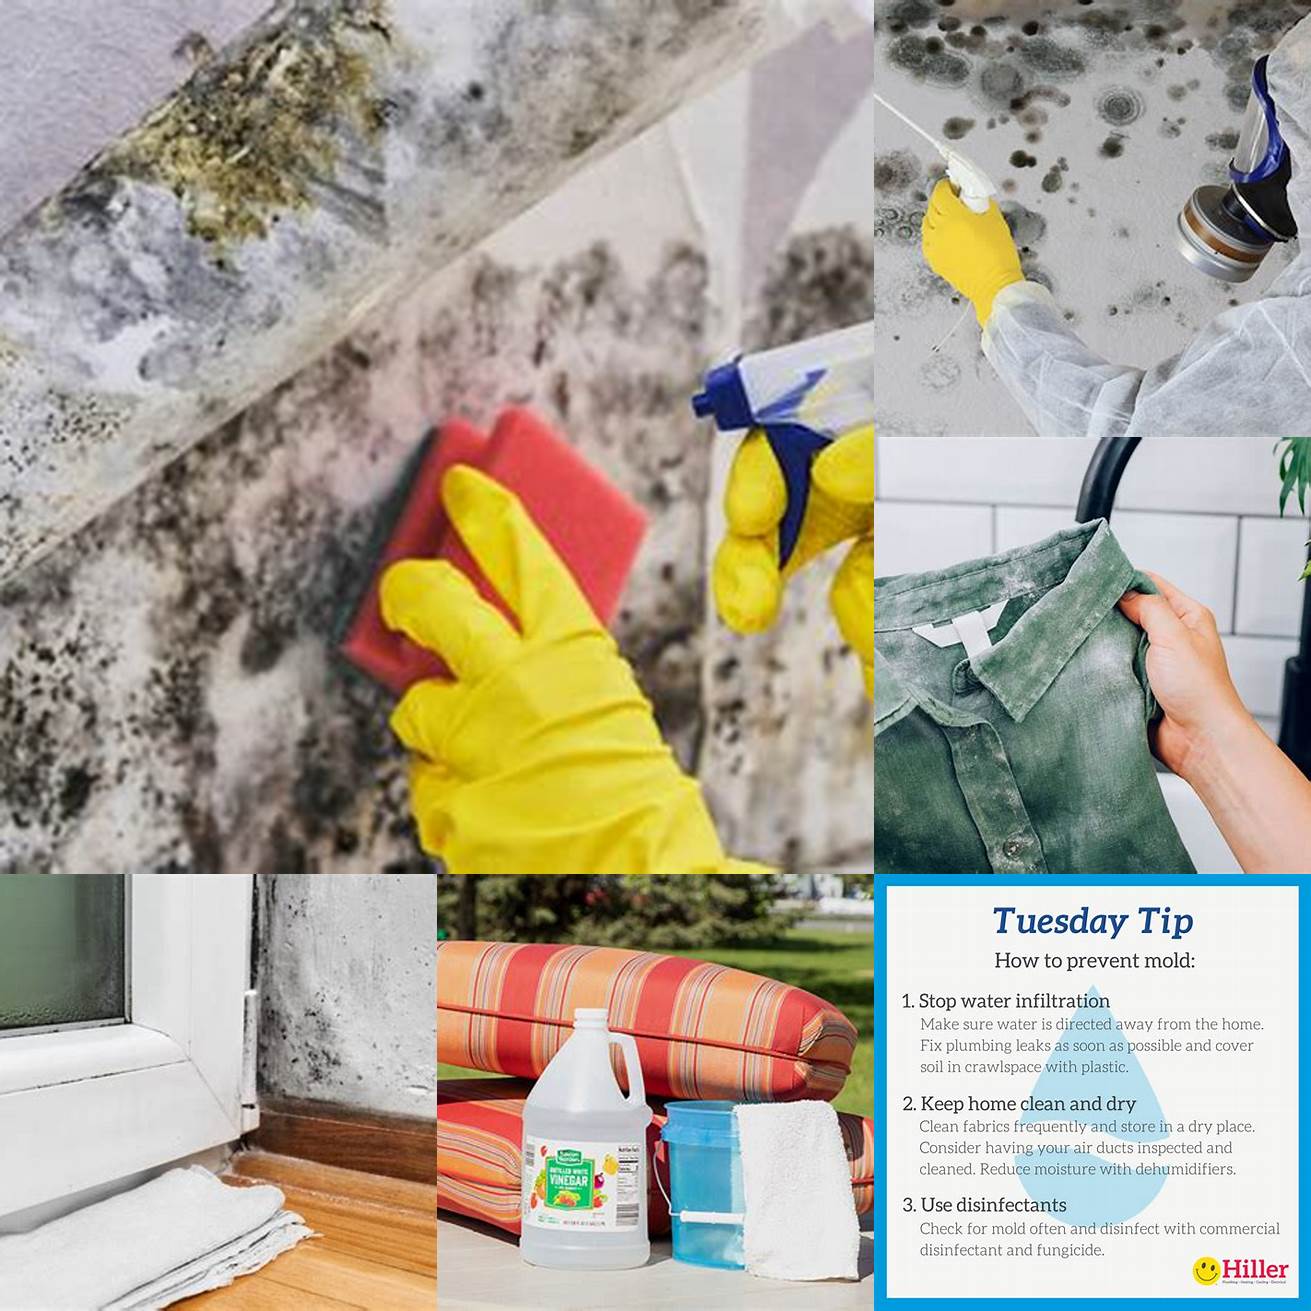 5 Store the mat in a dry and cool place to prevent mold and mildew growth